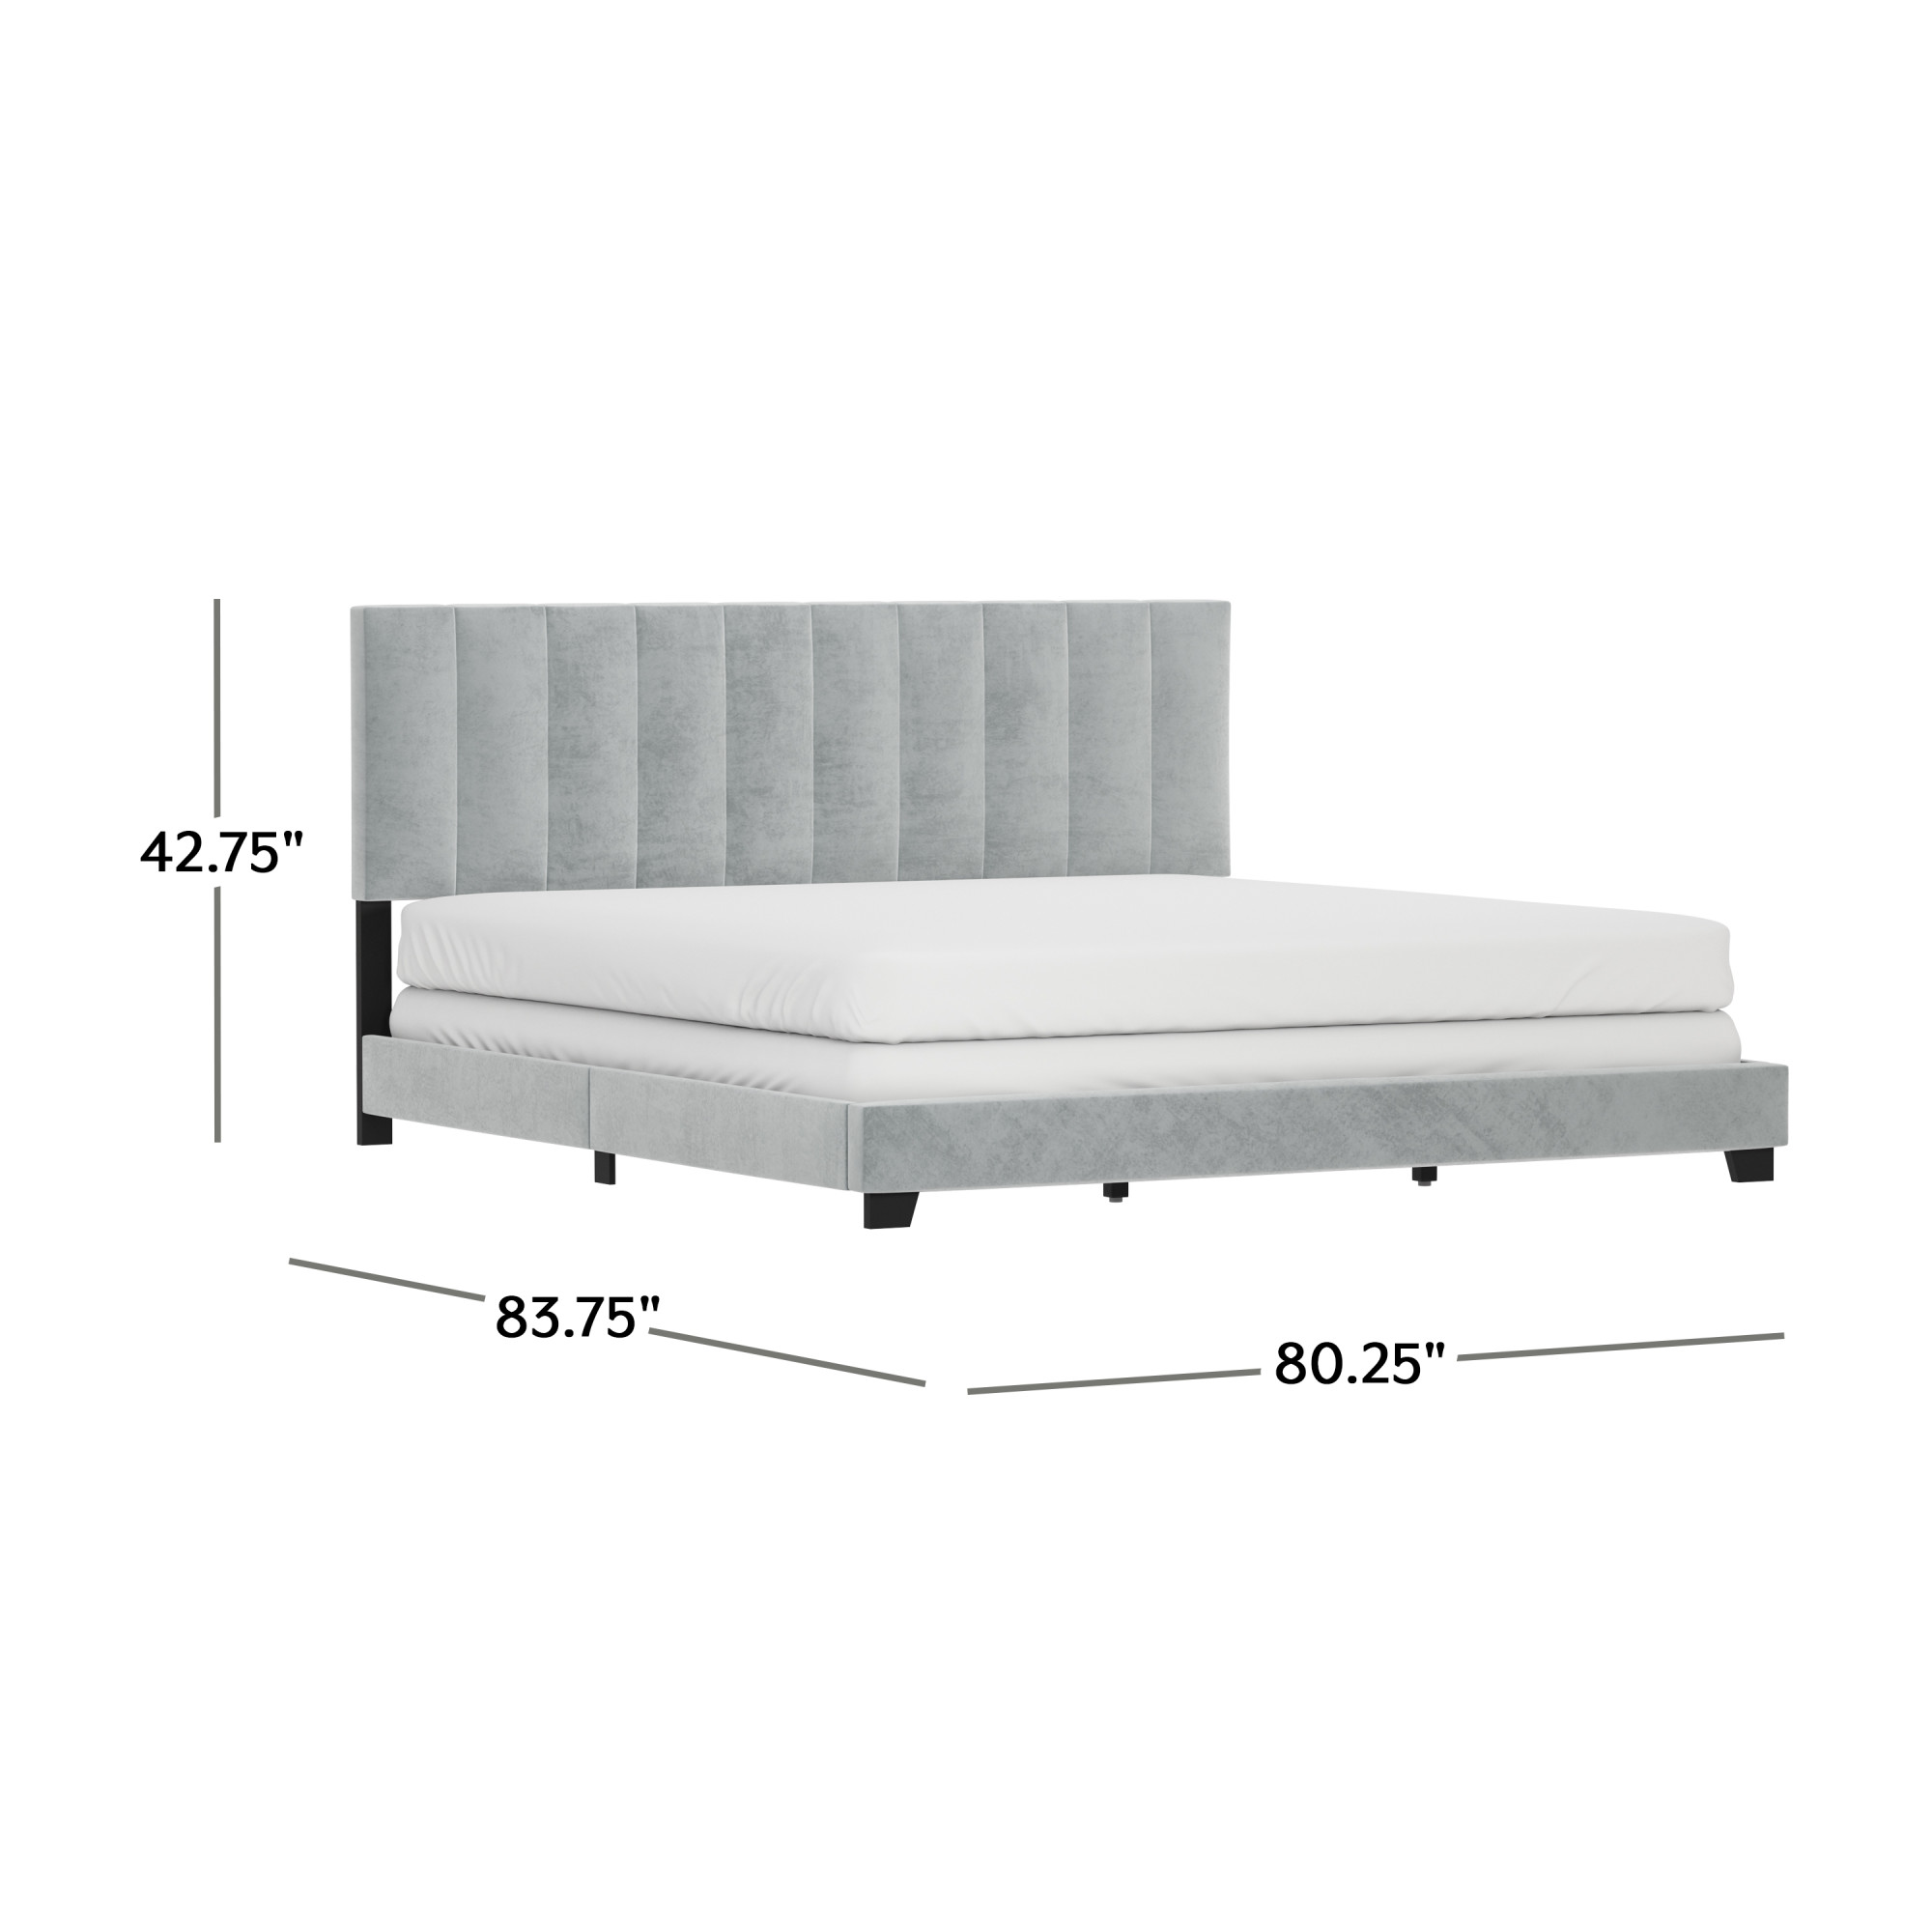 Reece Channel Stitched Upholstered King Bed, Platinum Grey, by Hillsdale Living Essentials - image 4 of 15